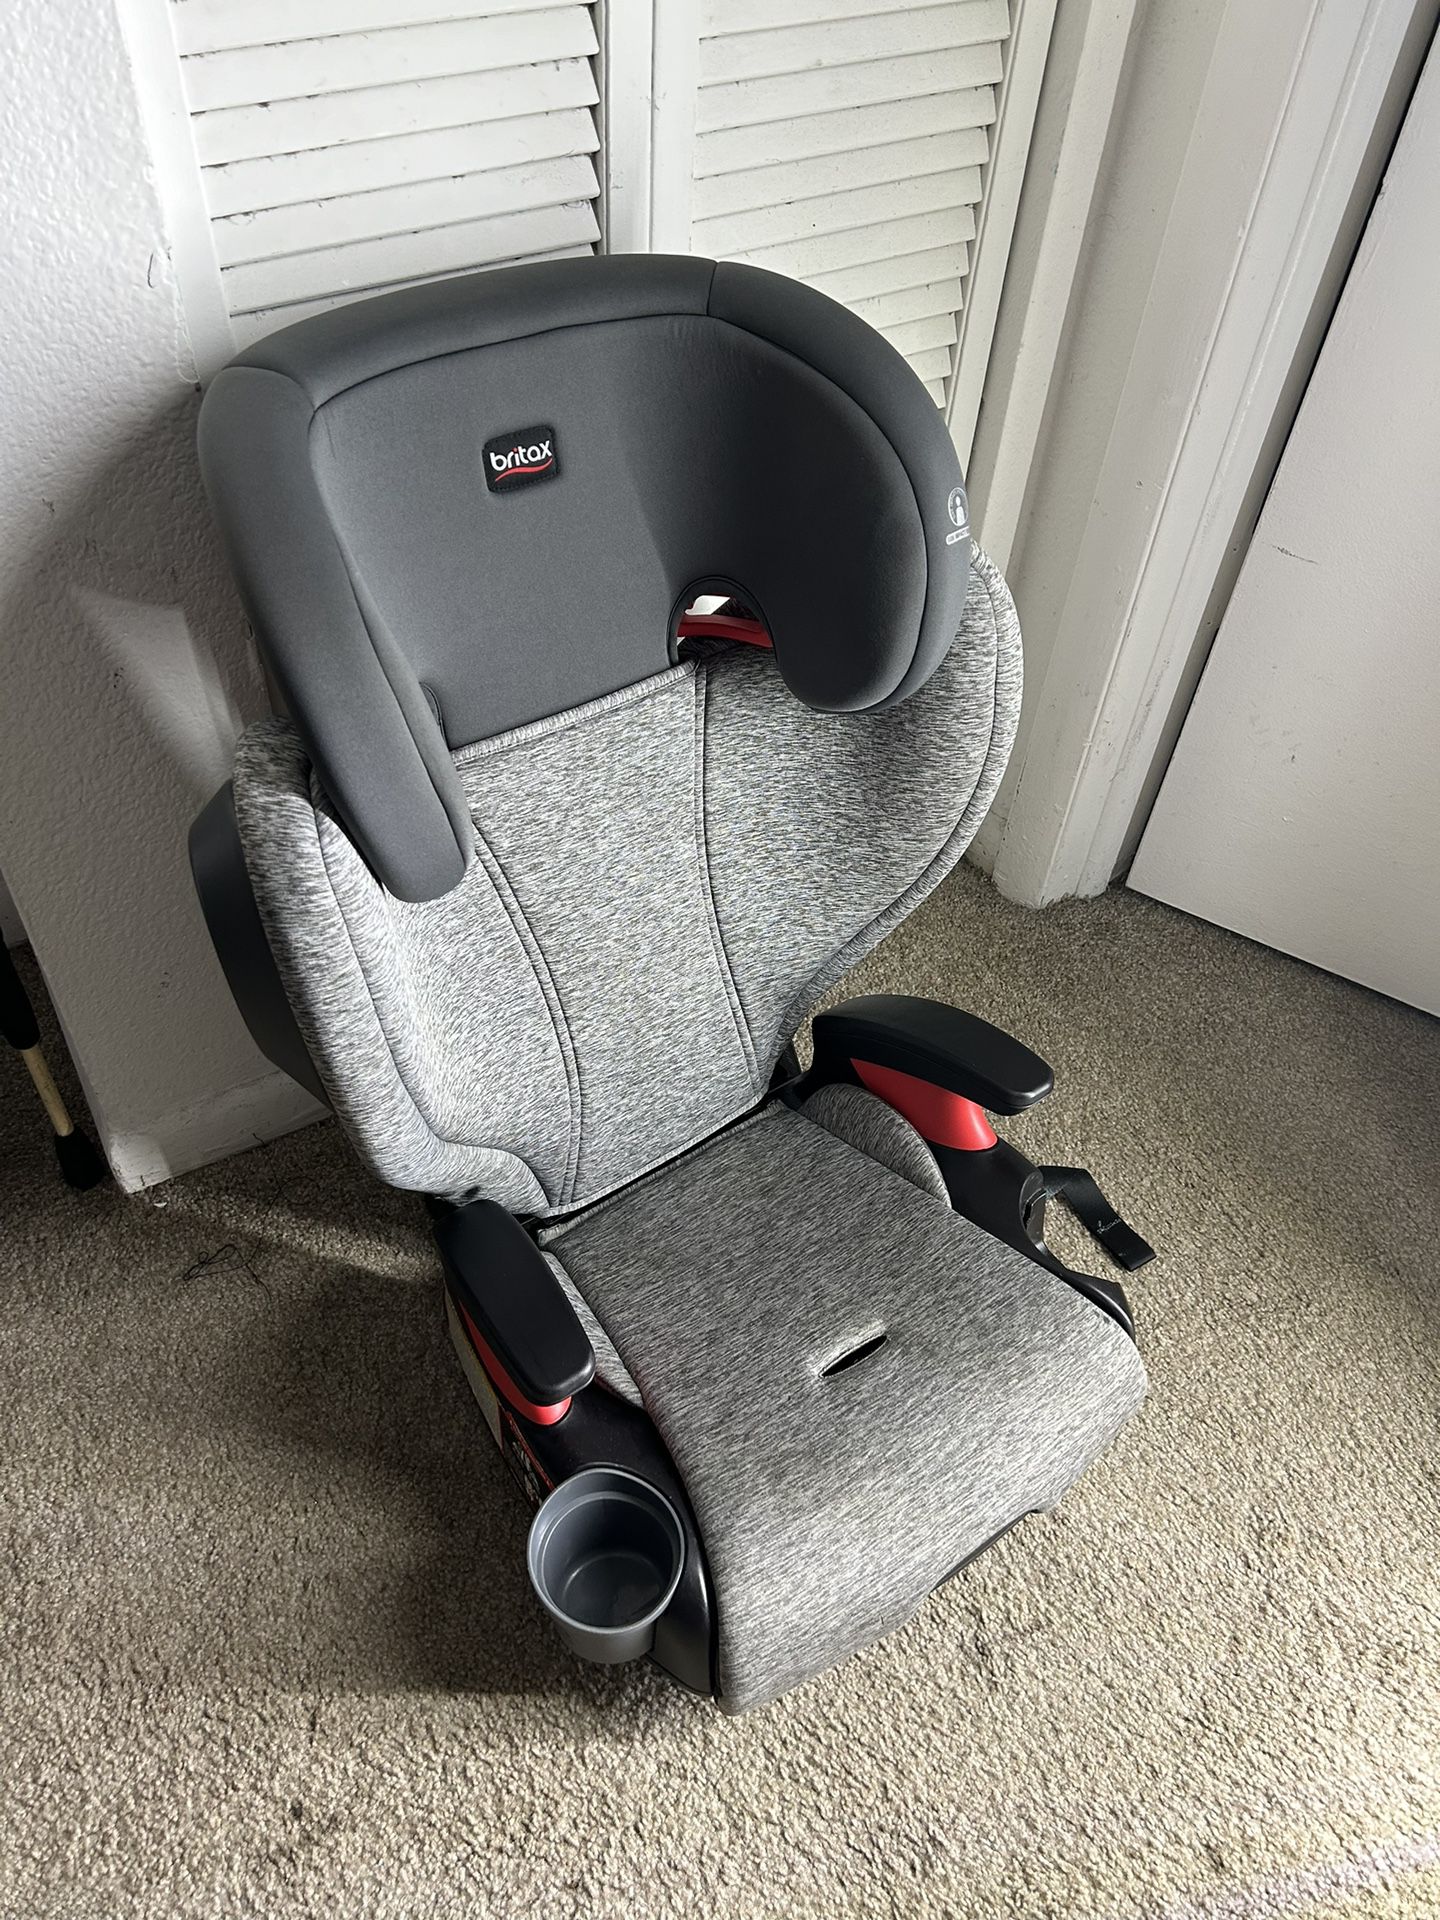 Britax Highpoint Booster Seat 2 in 1 